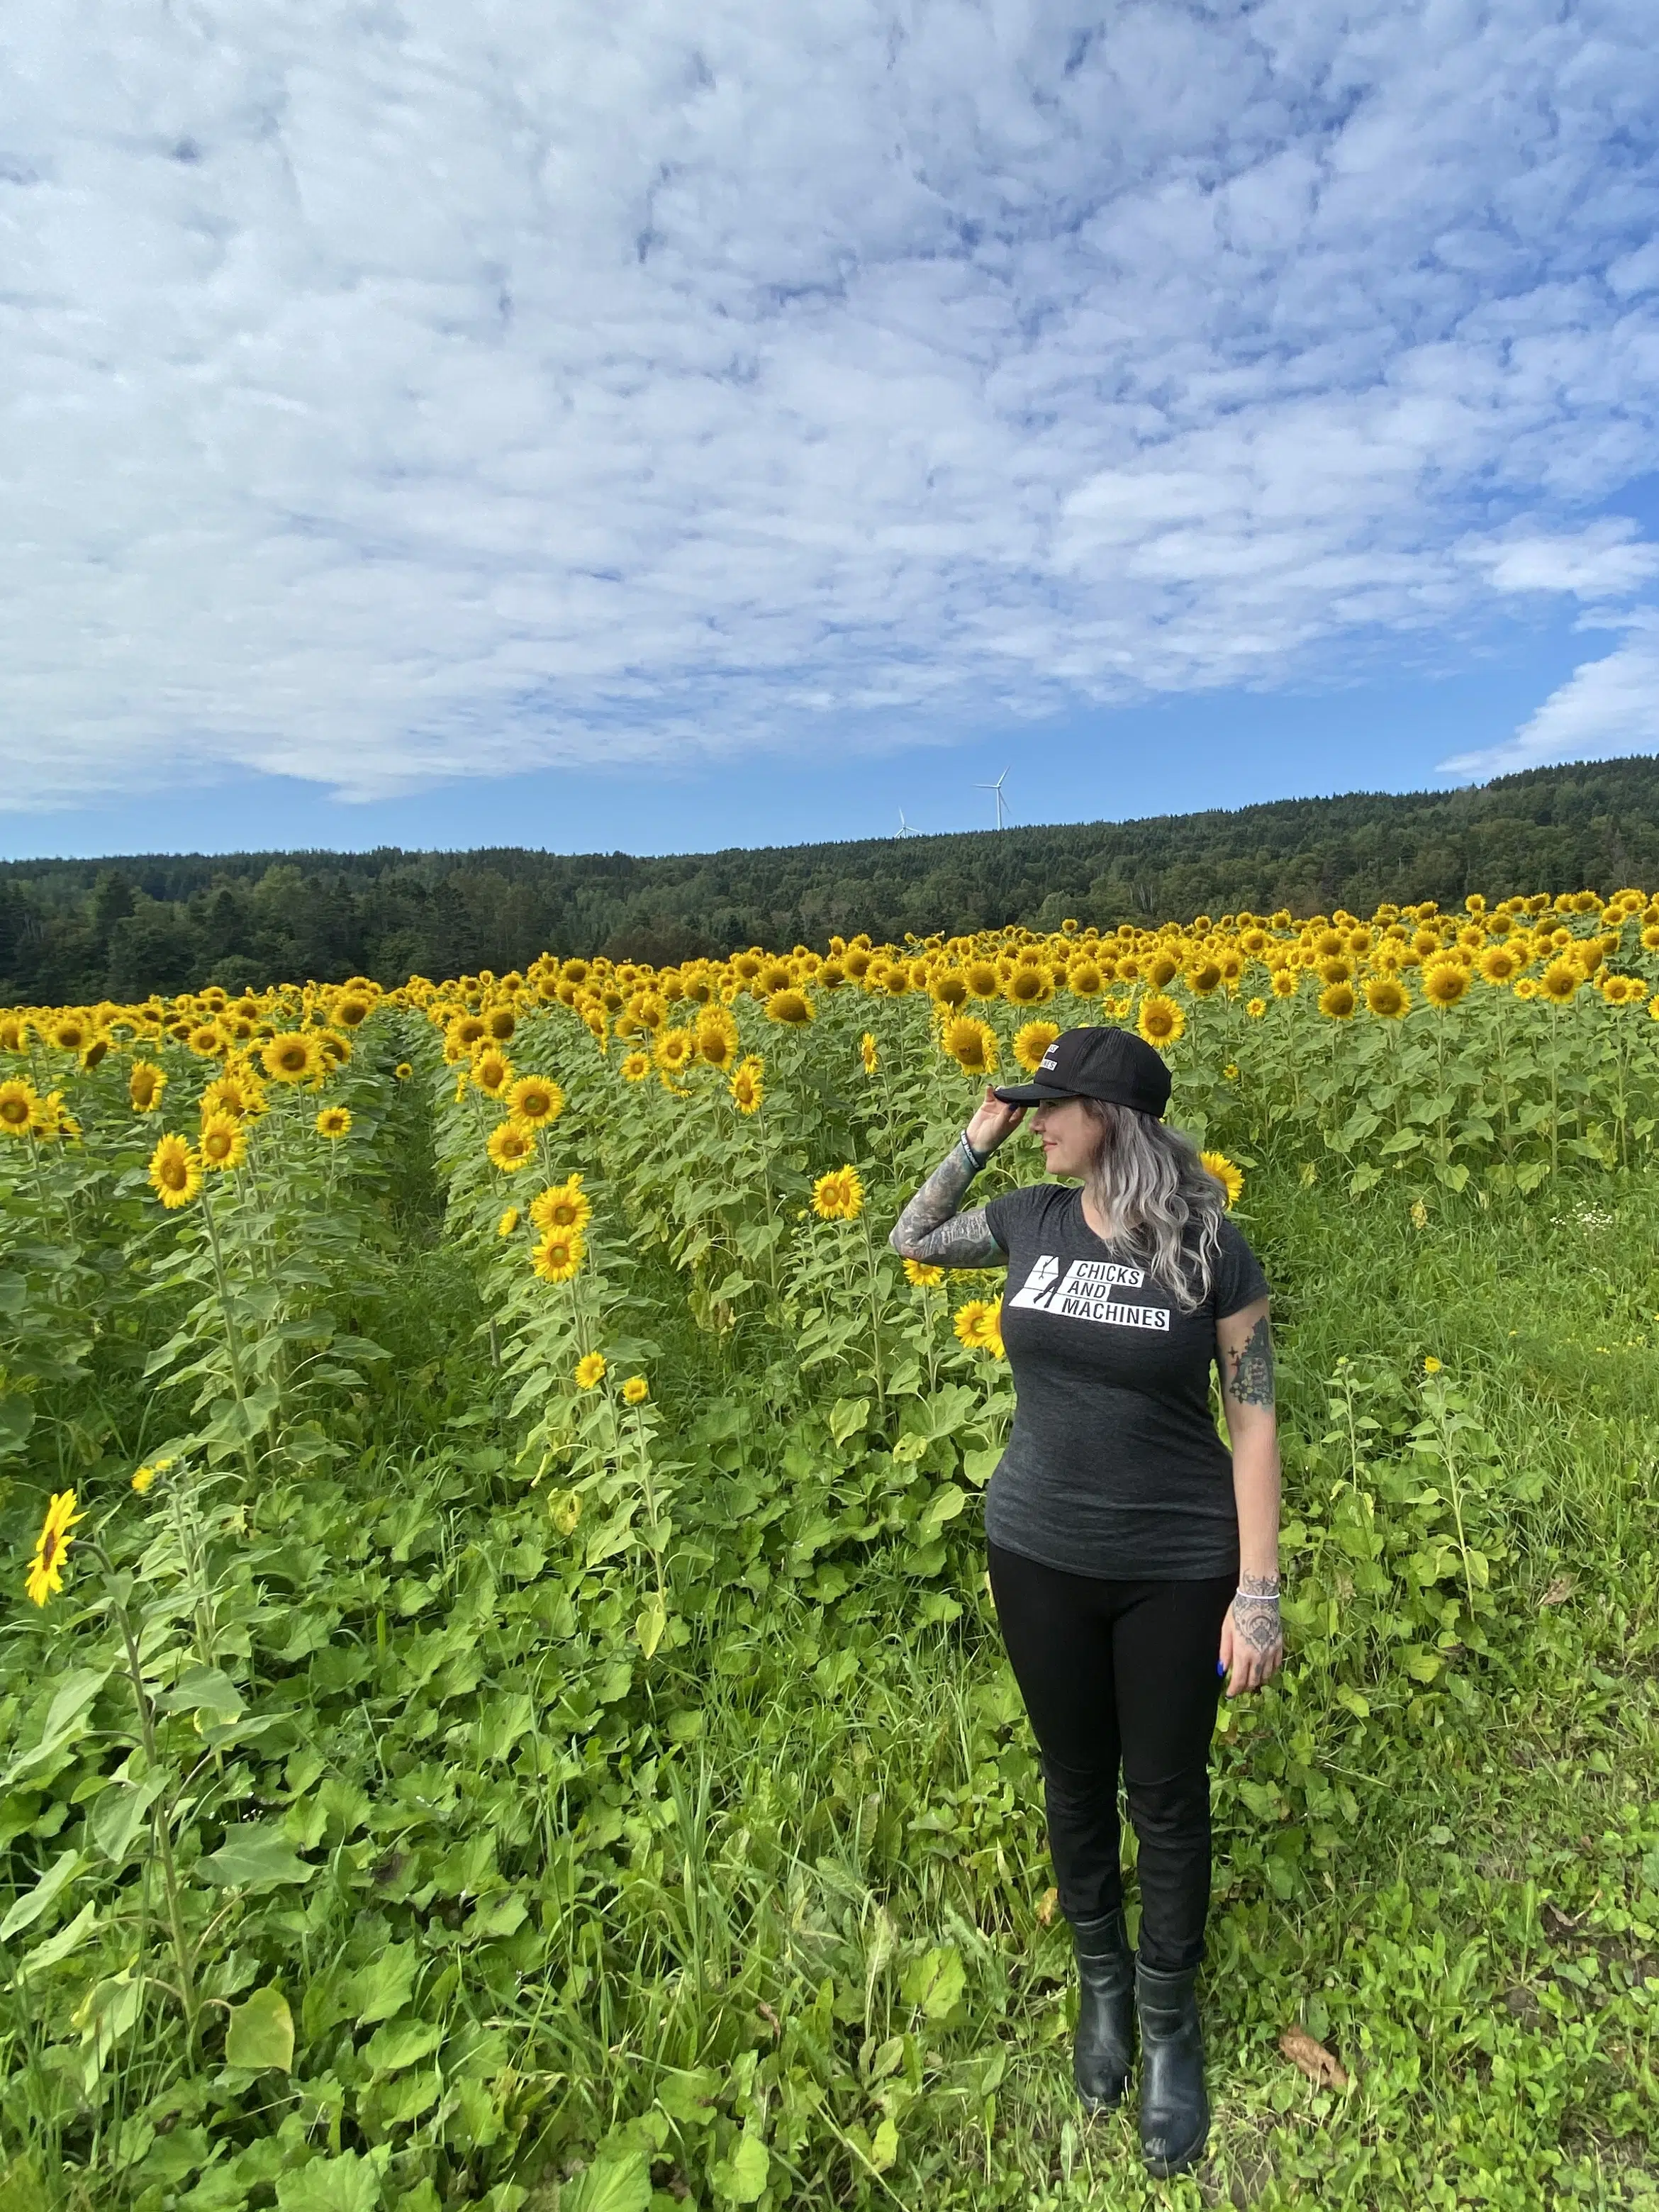 A bright field of sunflowers